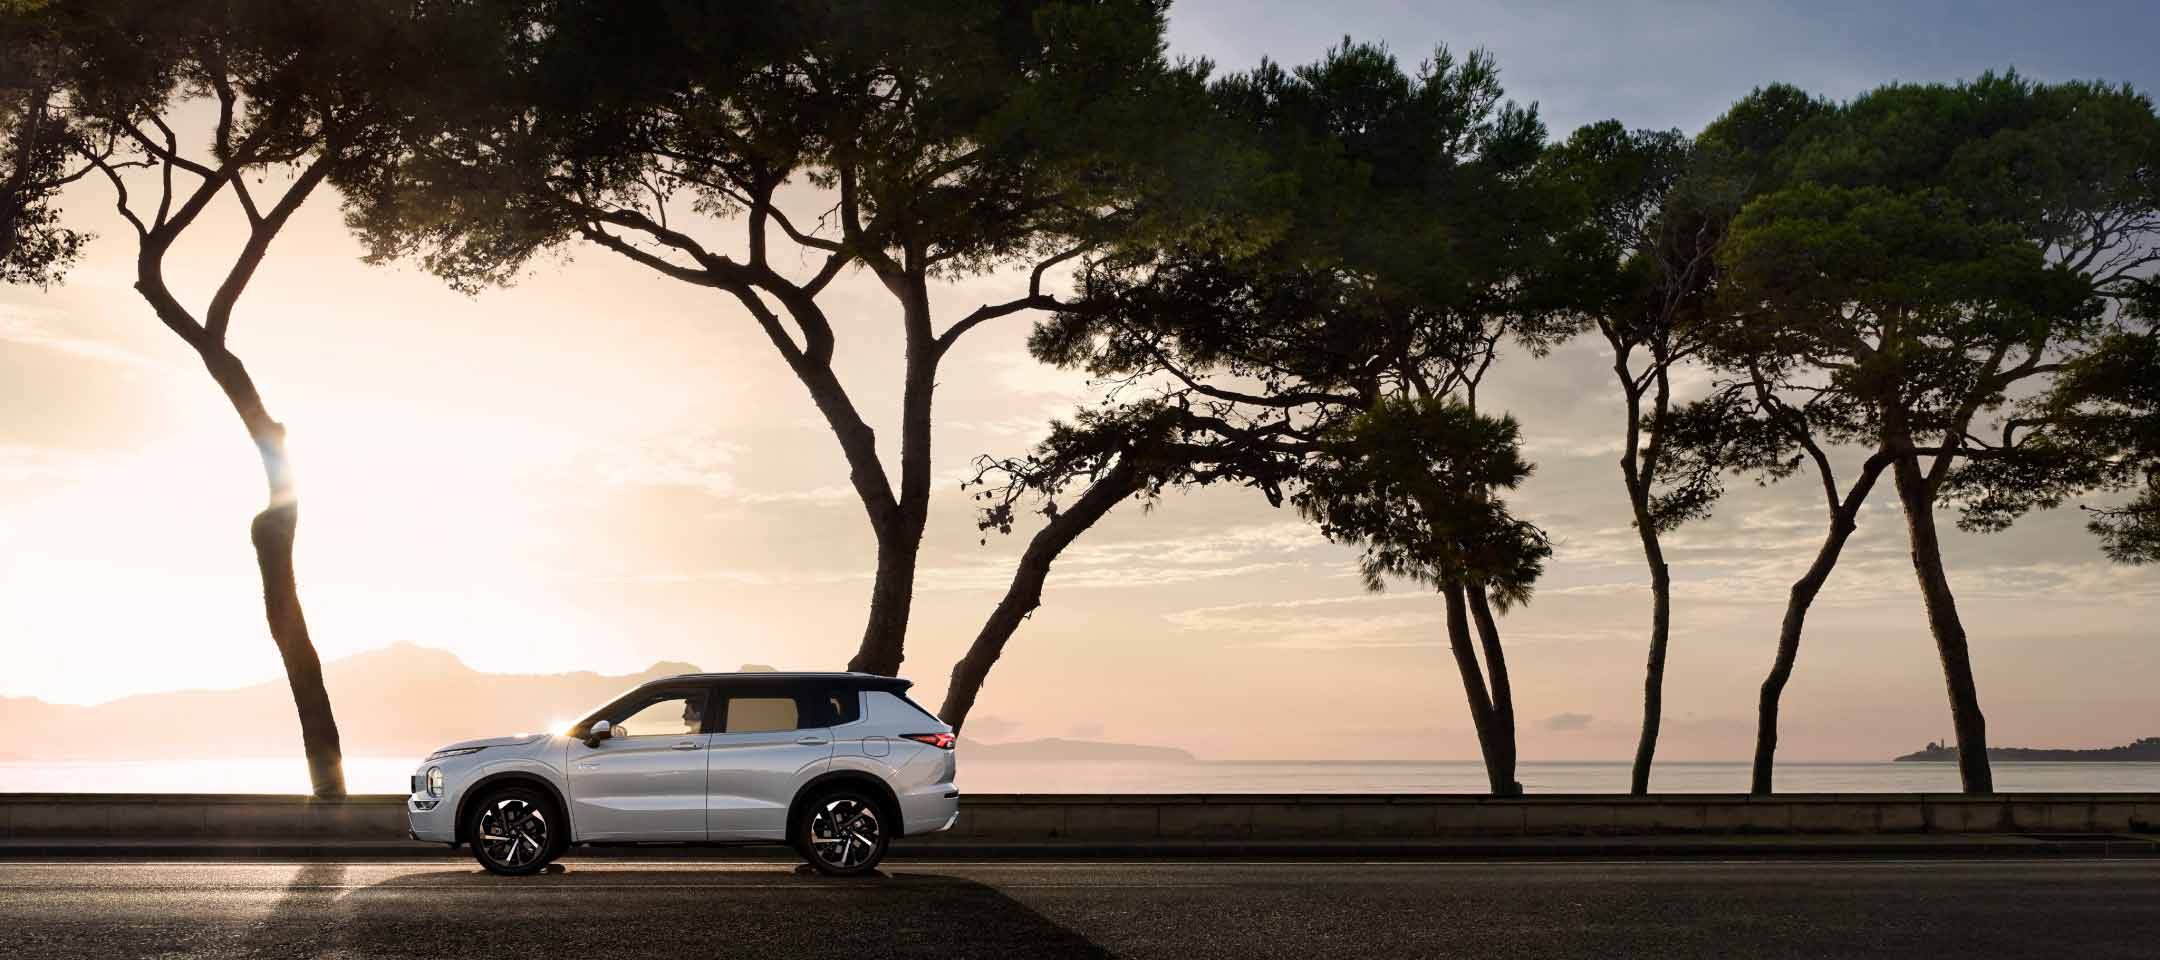 Side profile of a silver 2023 Mitsubishi Outlander PHEV SUV driving on a road with trees